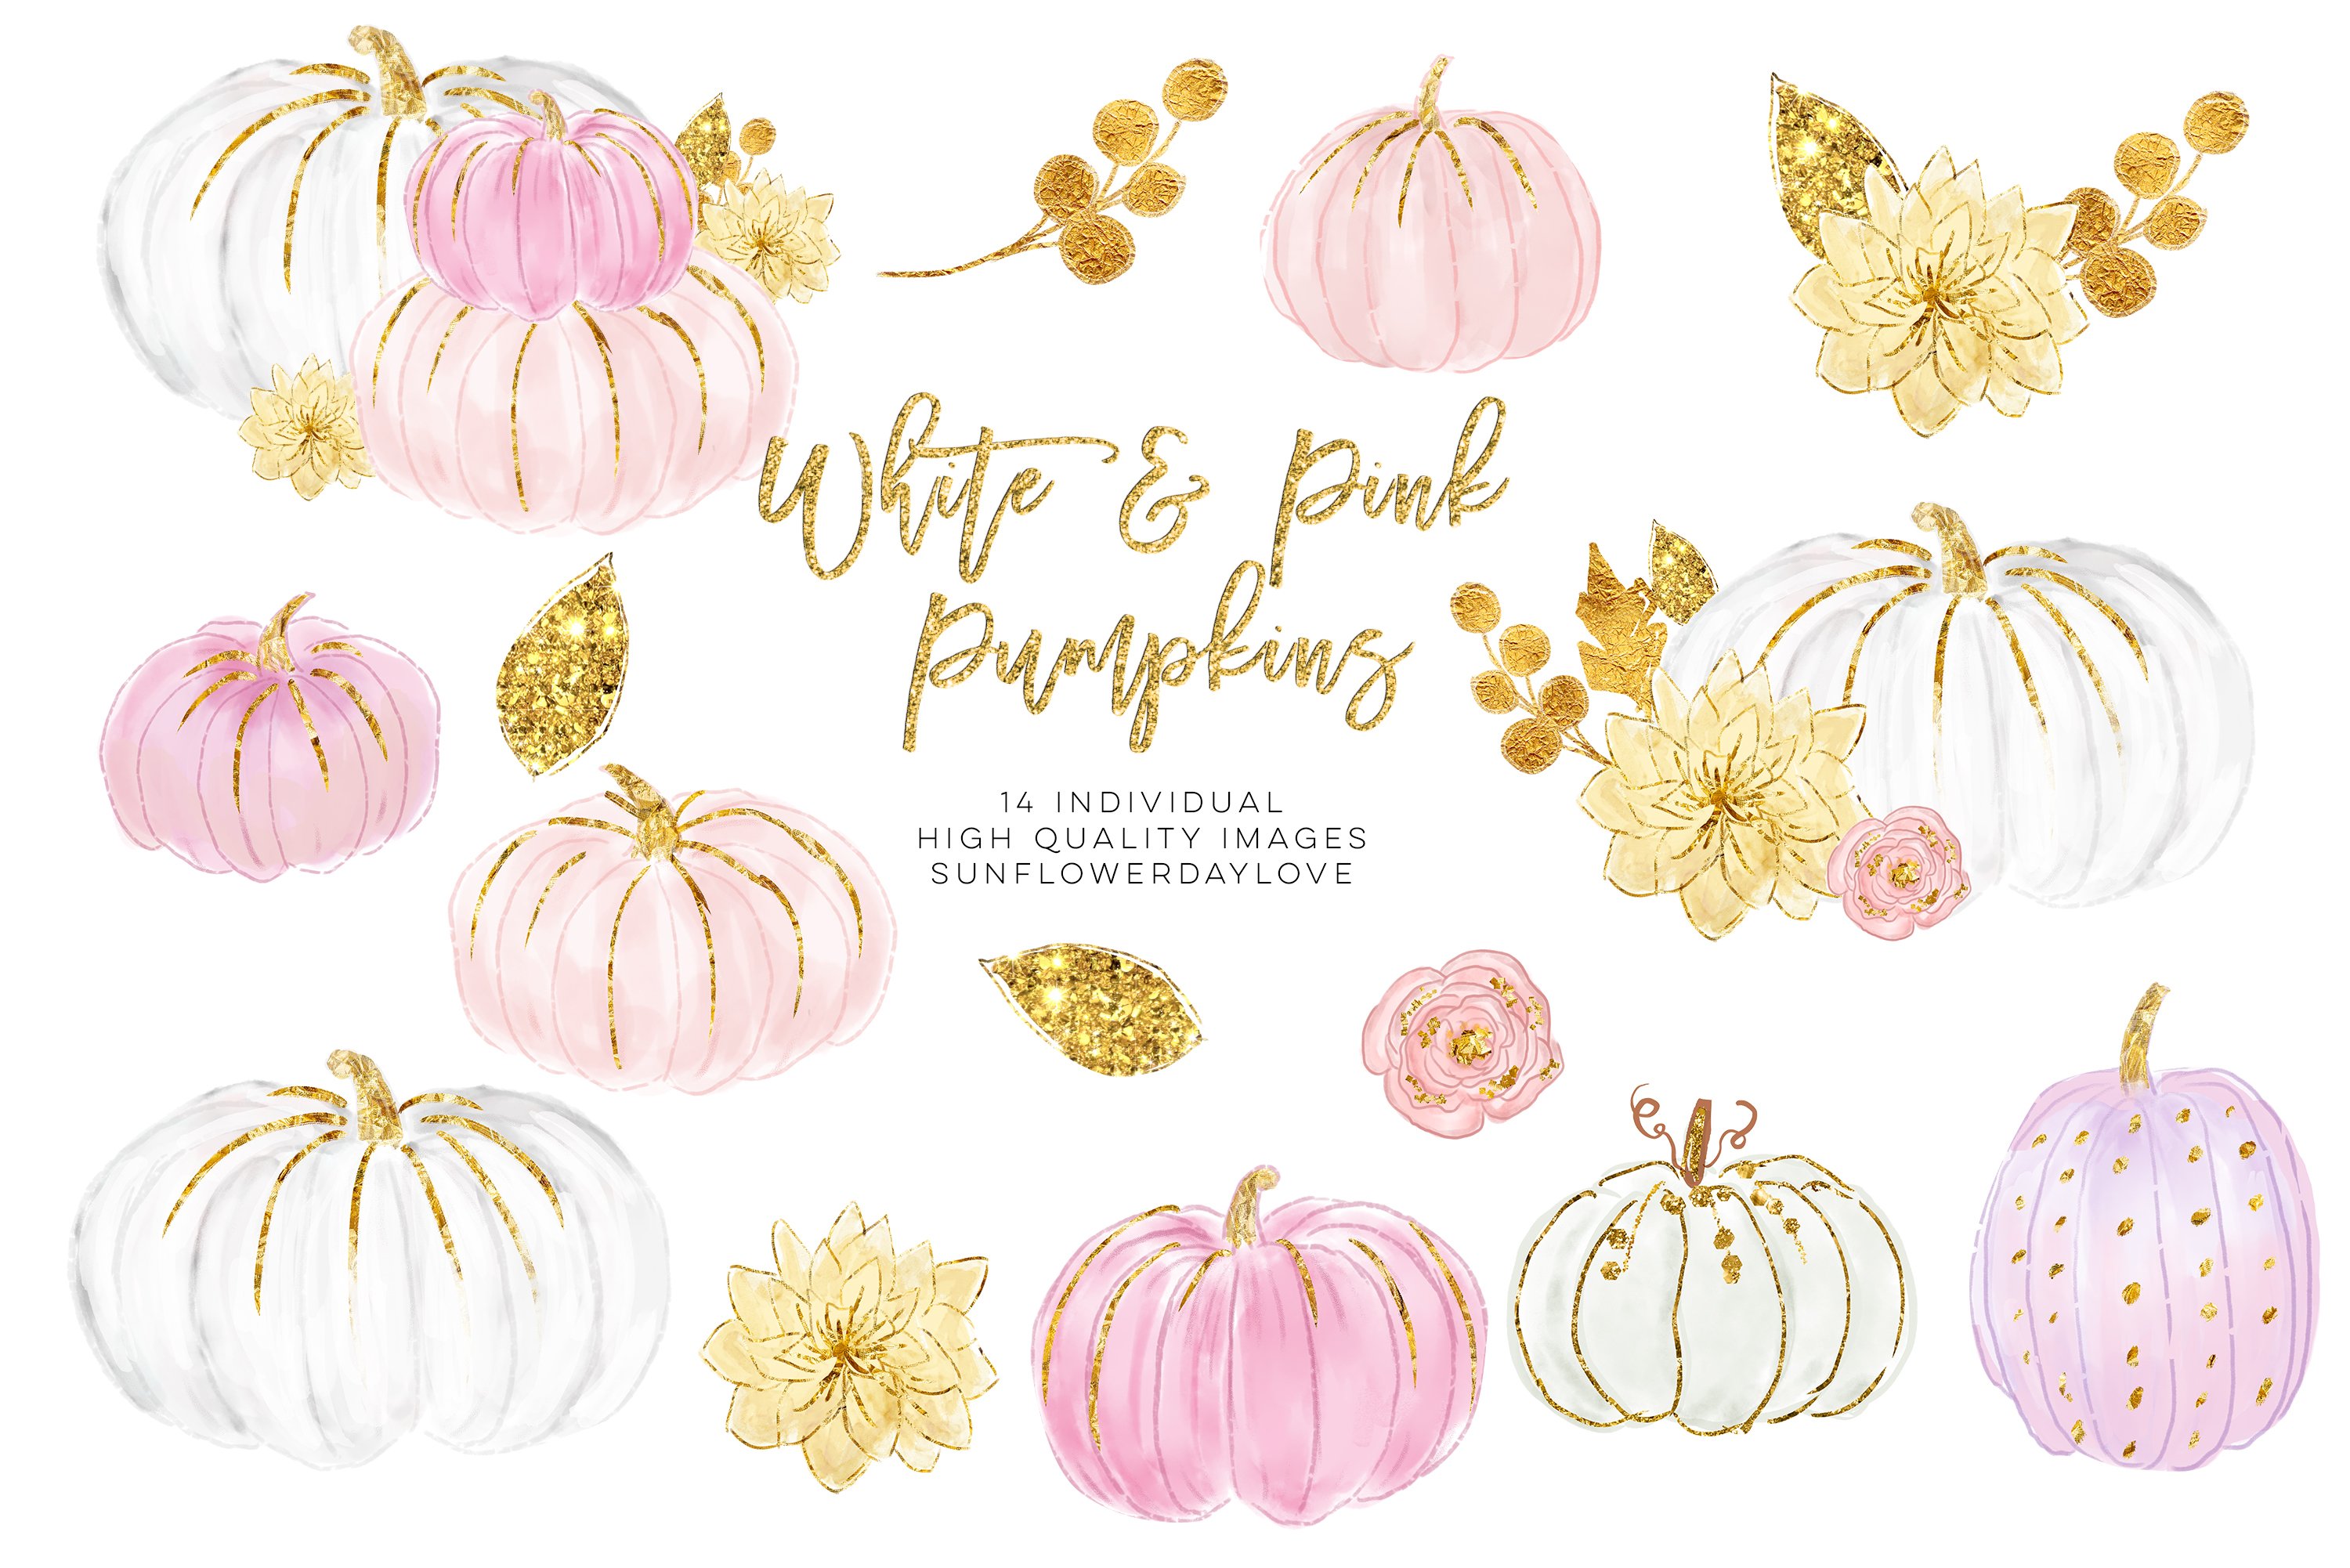 White and Pink Pumpkins.